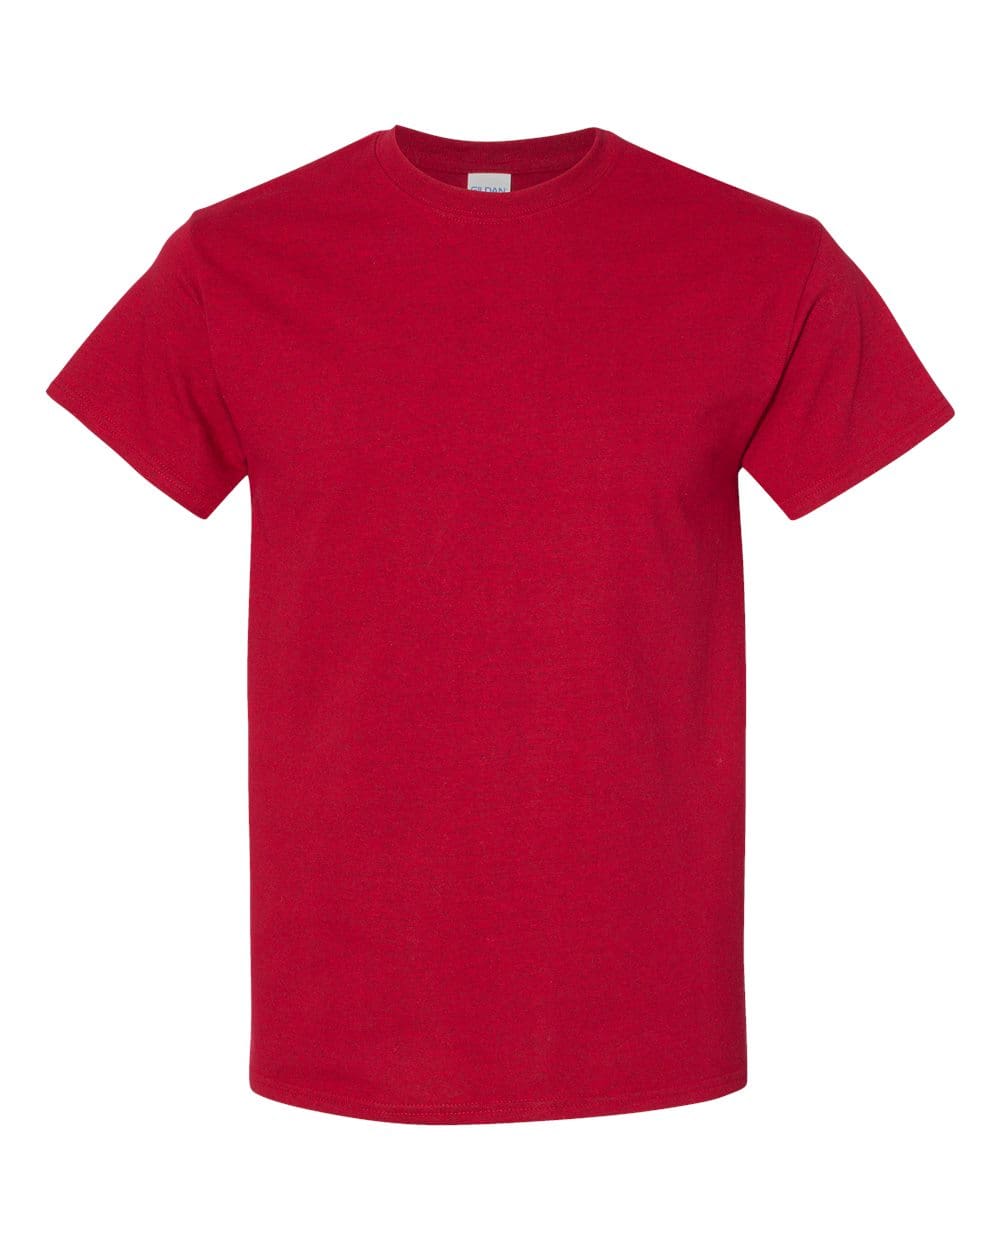 Gildan Heavy Cotton™ T-Shirt for embroidery or screen print at